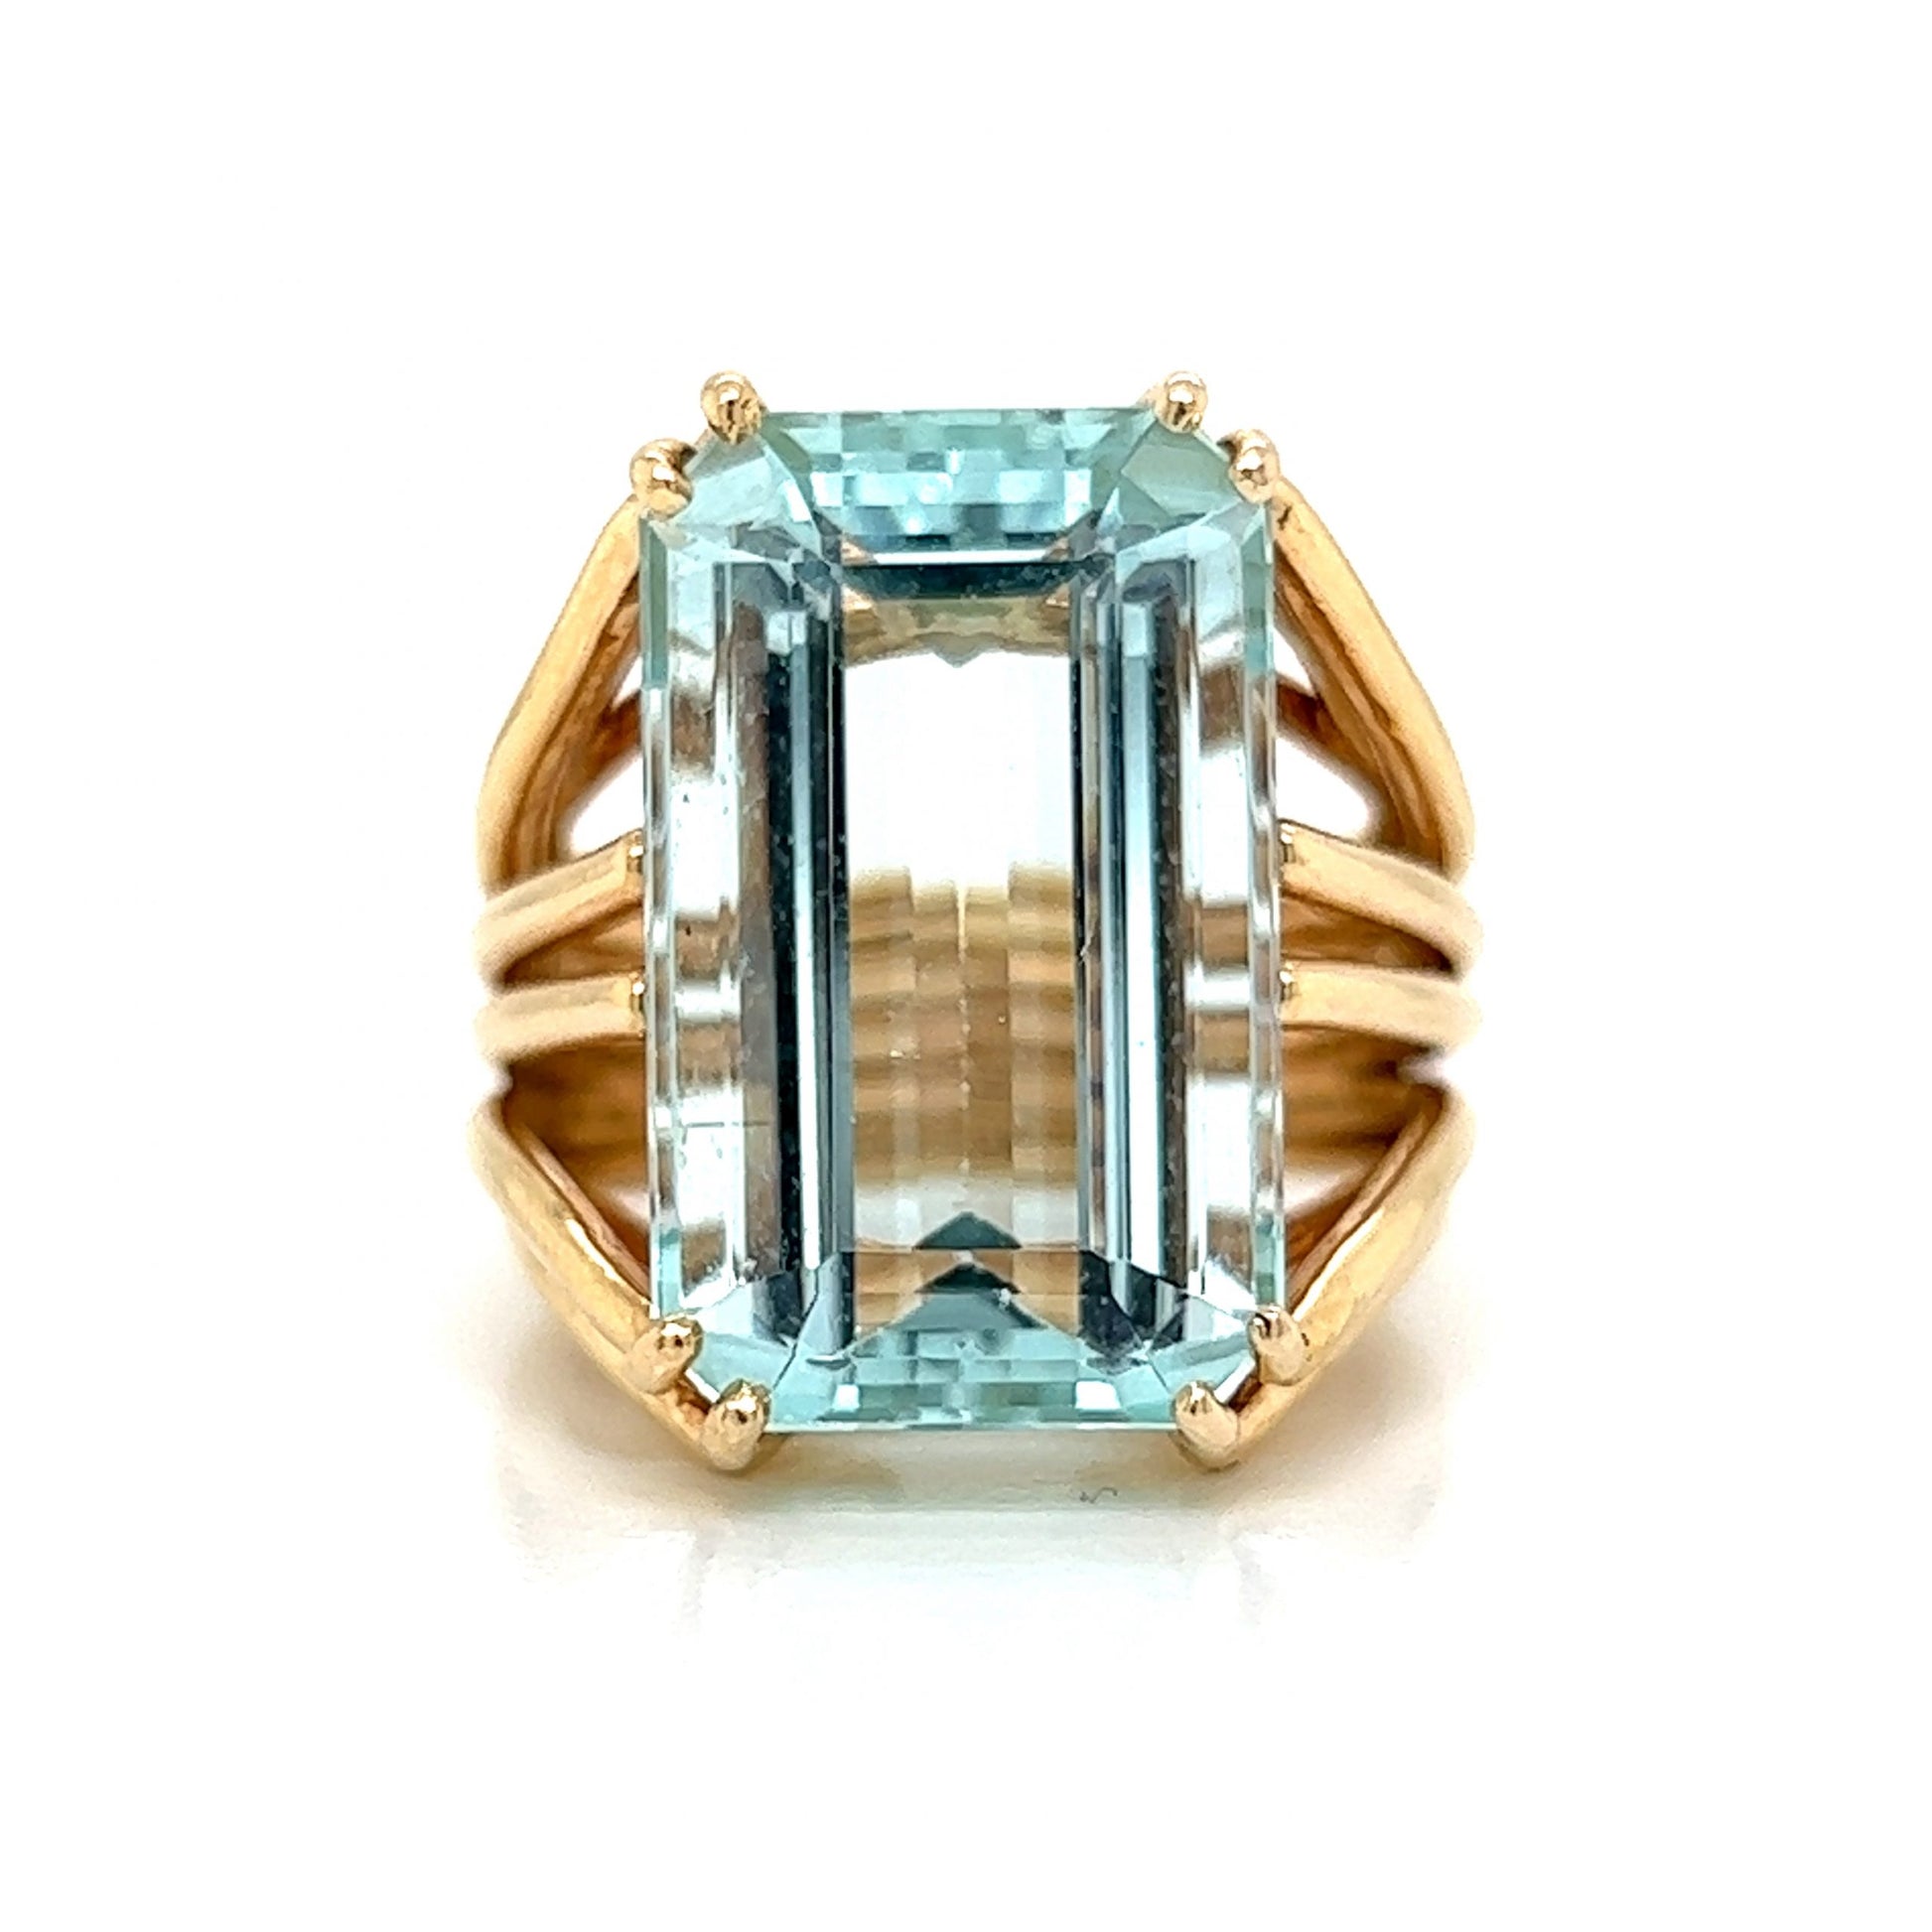 Mid-Century Aquamarine Cocktail Ring in 14k Yellow GoldComposition: 14 Karat Yellow GoldRing Size: 5Total Gram Weight: 12.0 gInscription: 14K